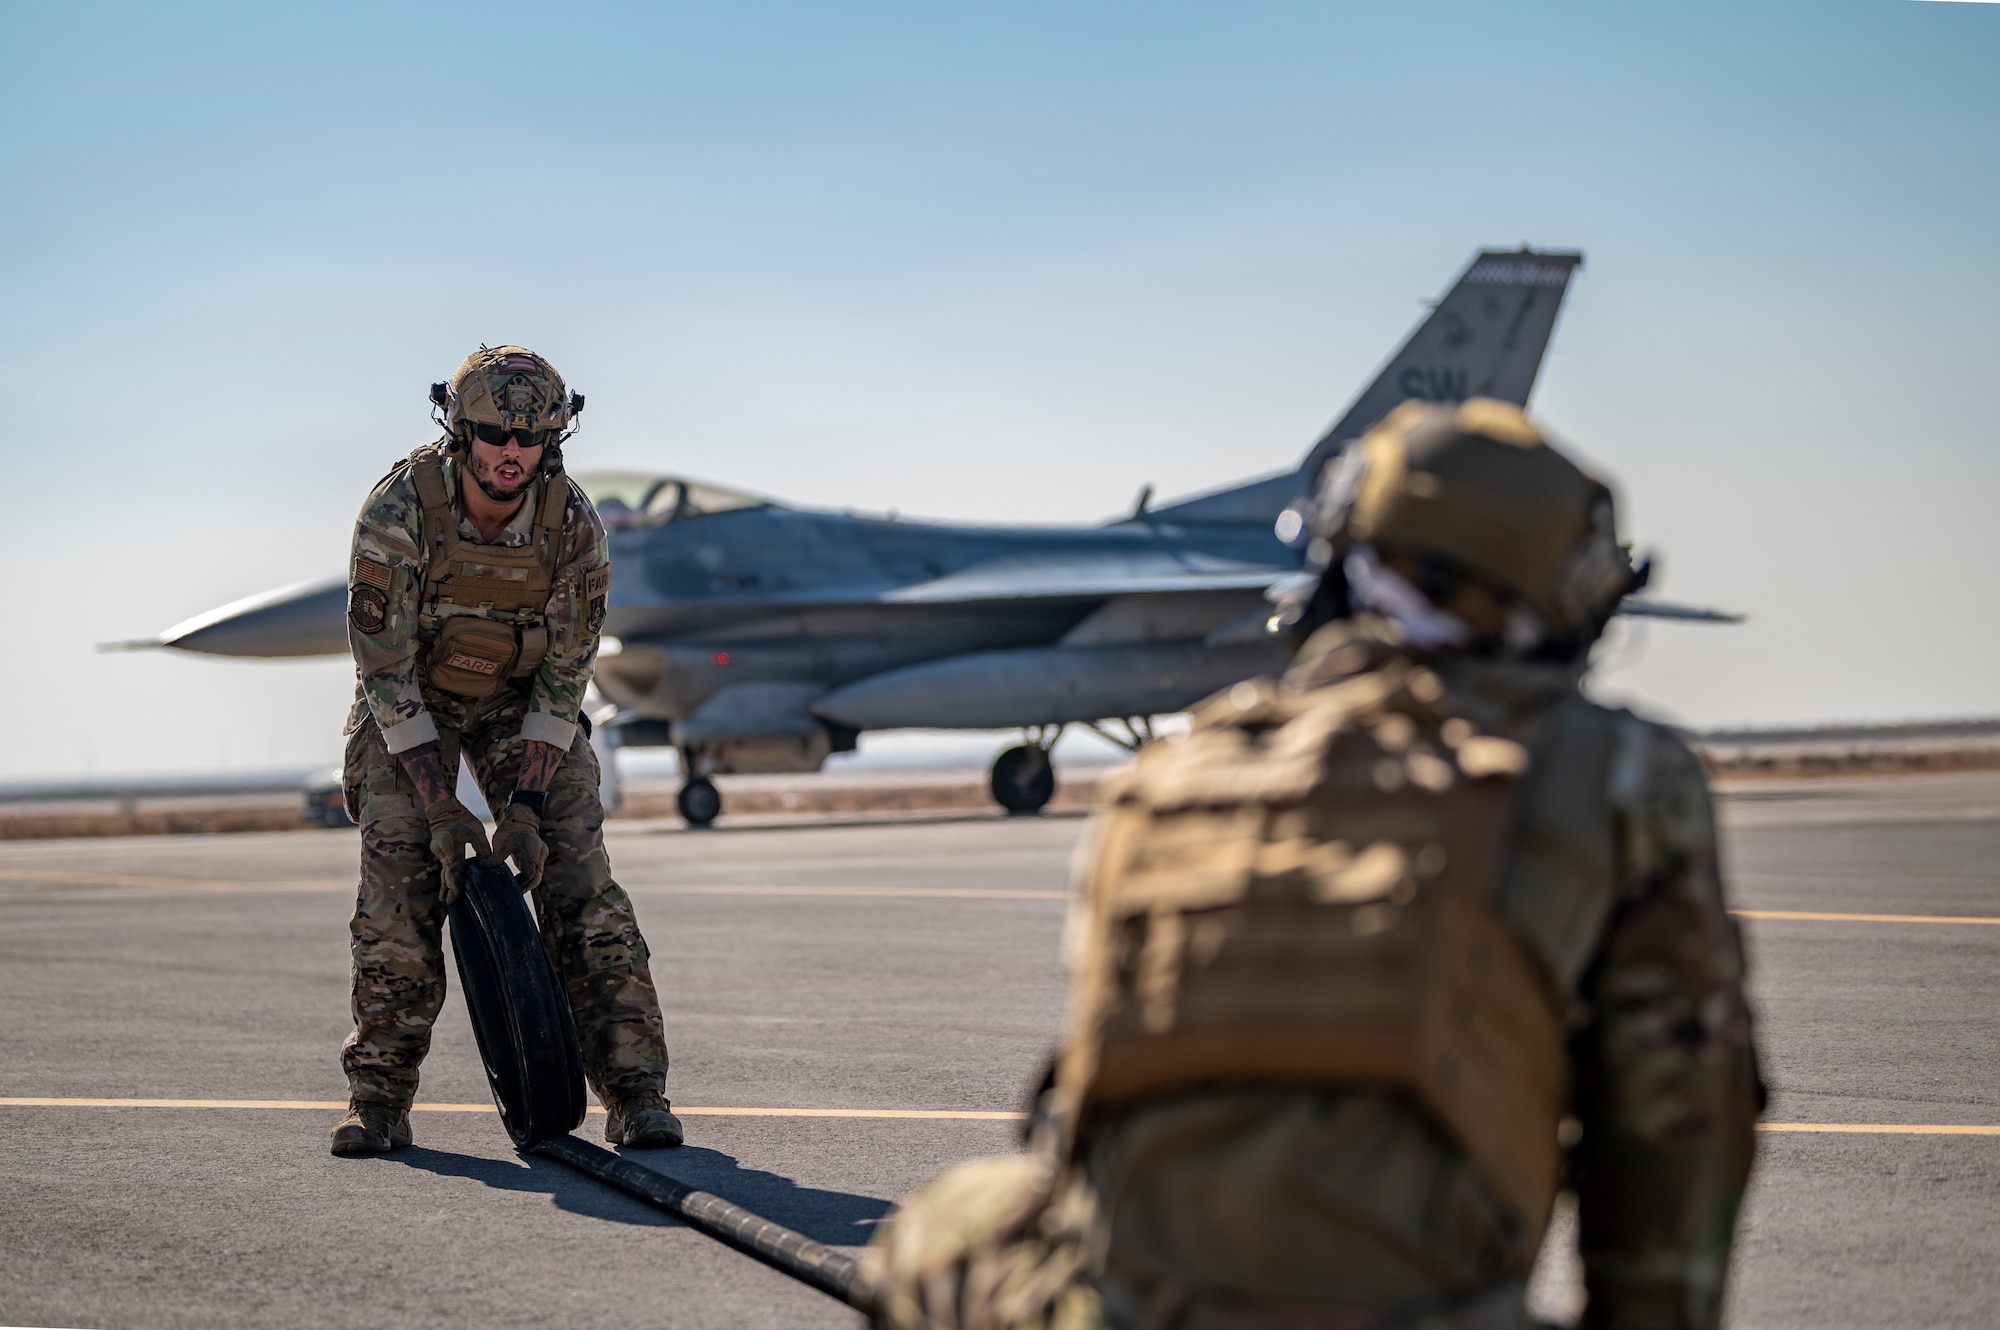 U.S. Airmen from the 26th Expeditionary Rescue Squadron participate in a Forward Area Refueling Point (FARP) exercise for two F-16C Fighting Falcons Nov. 26, 2021, at an undisclosed location somewhere in Southwest Asia.